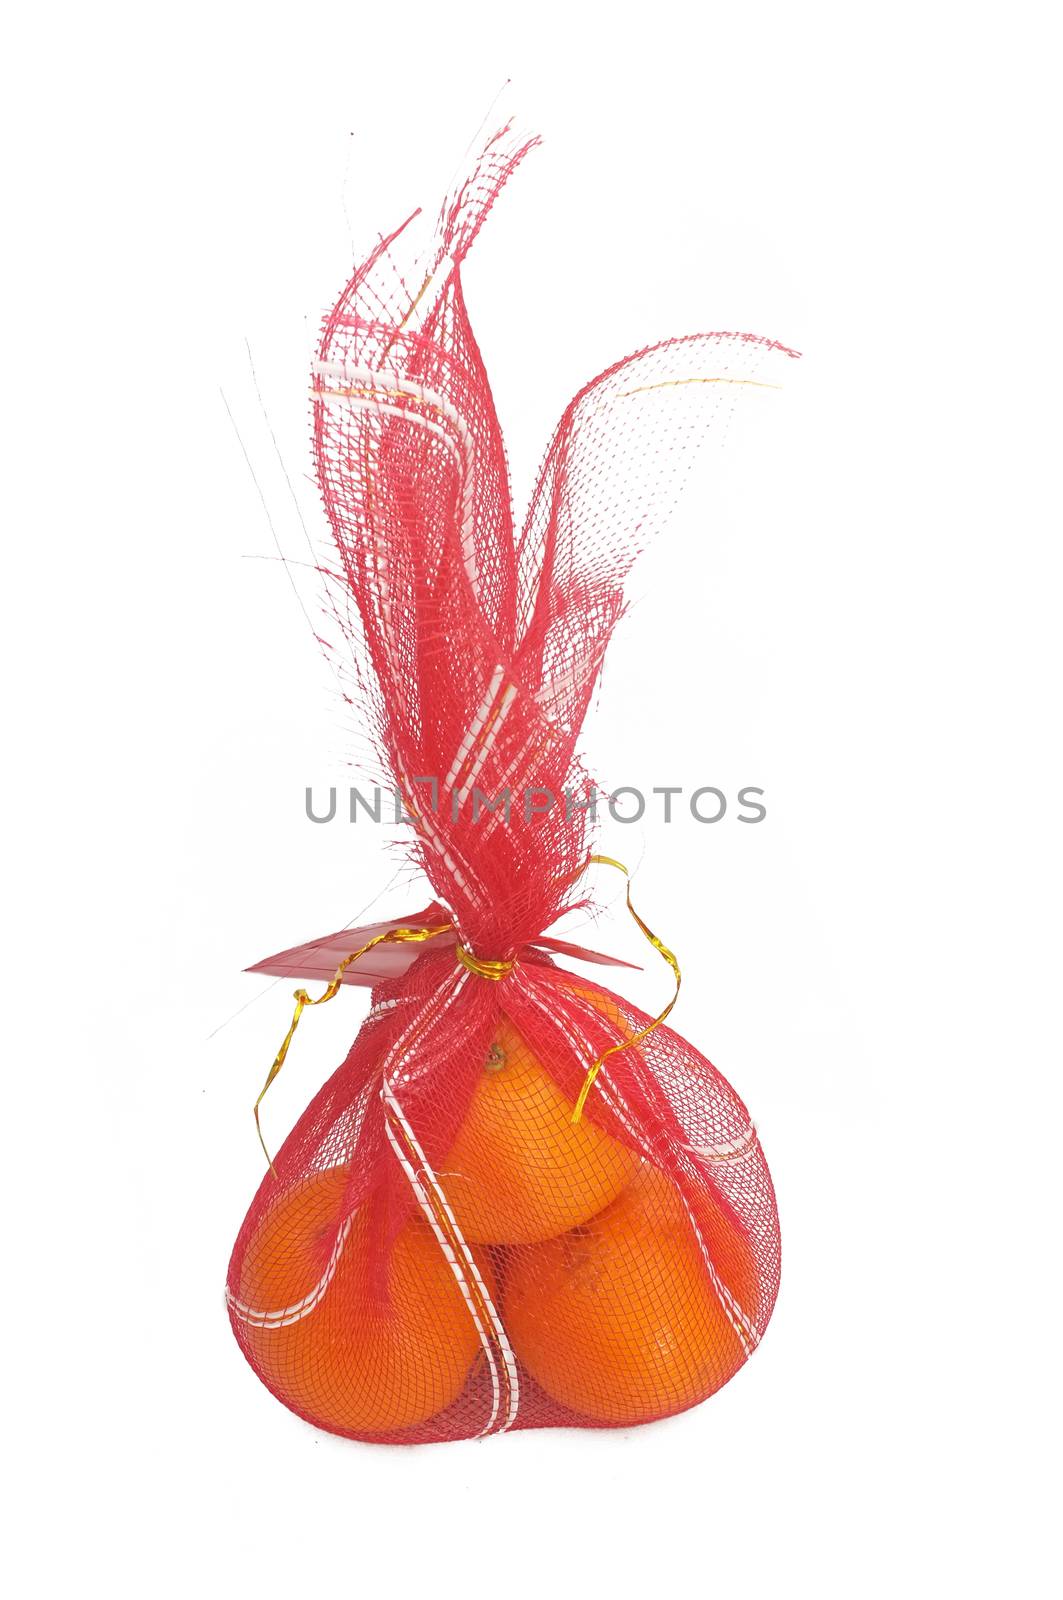 Oranges in chinese new year red bag, Chinese New Year decoration by Hepjam